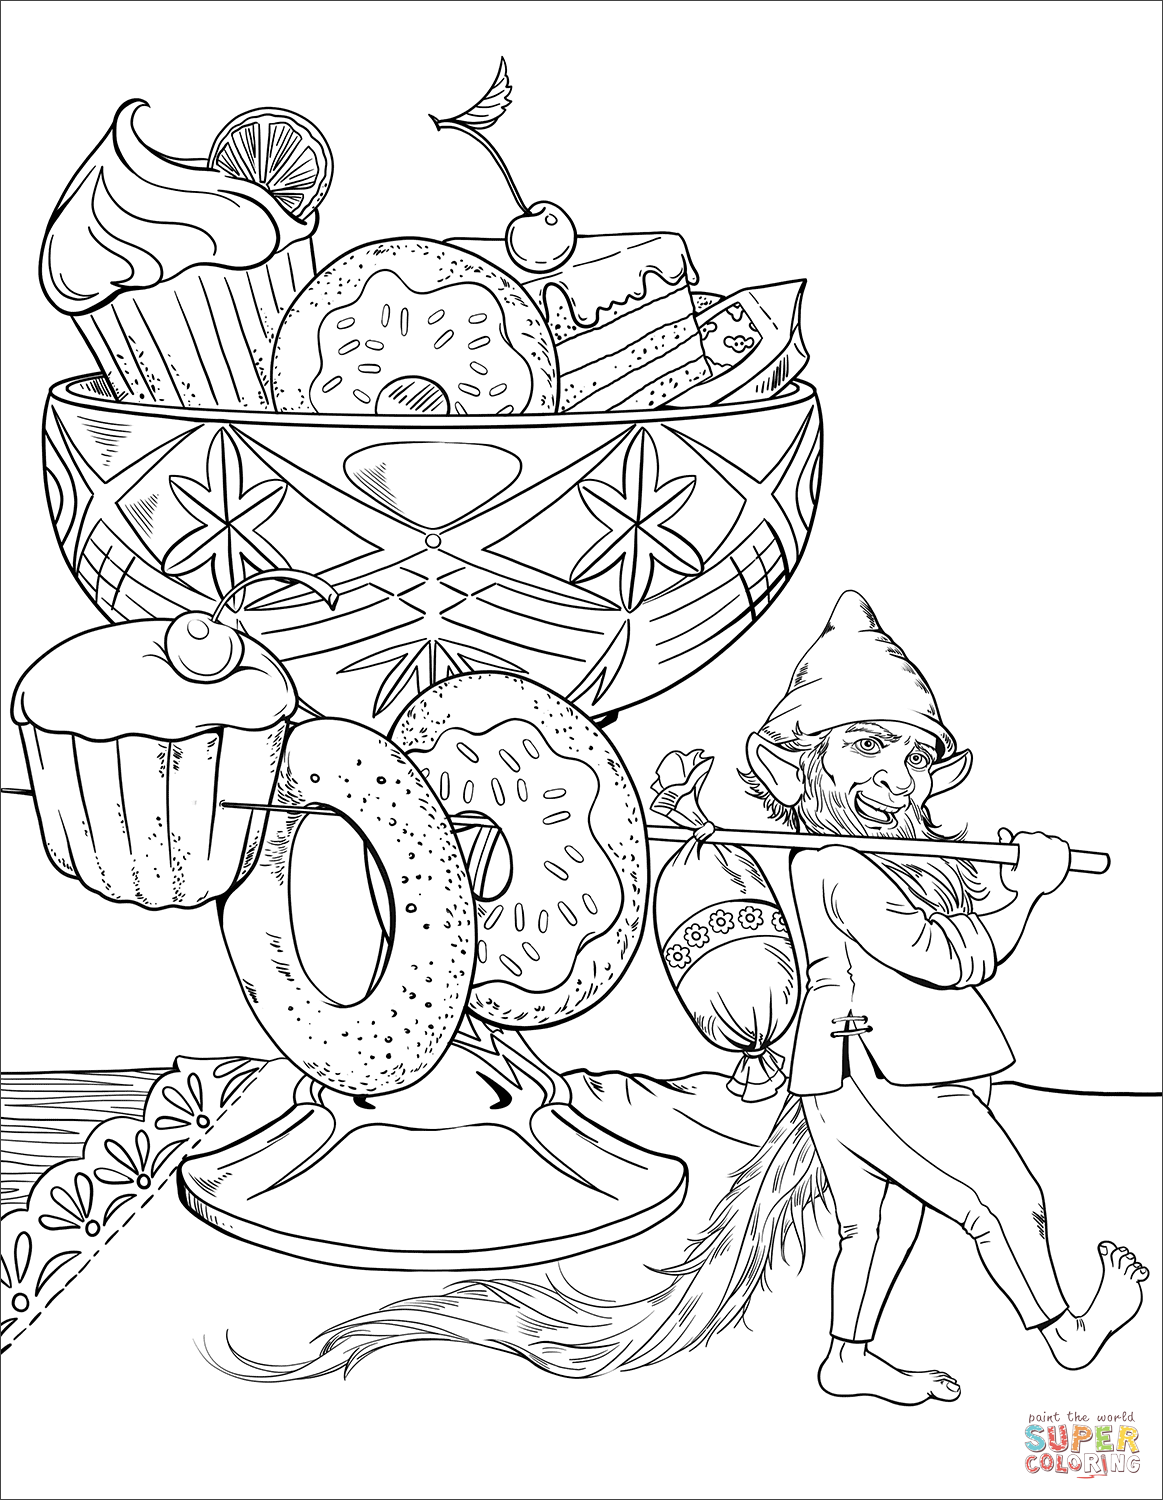 Gnome and His Dessert coloring page | Free Printable Coloring Pages